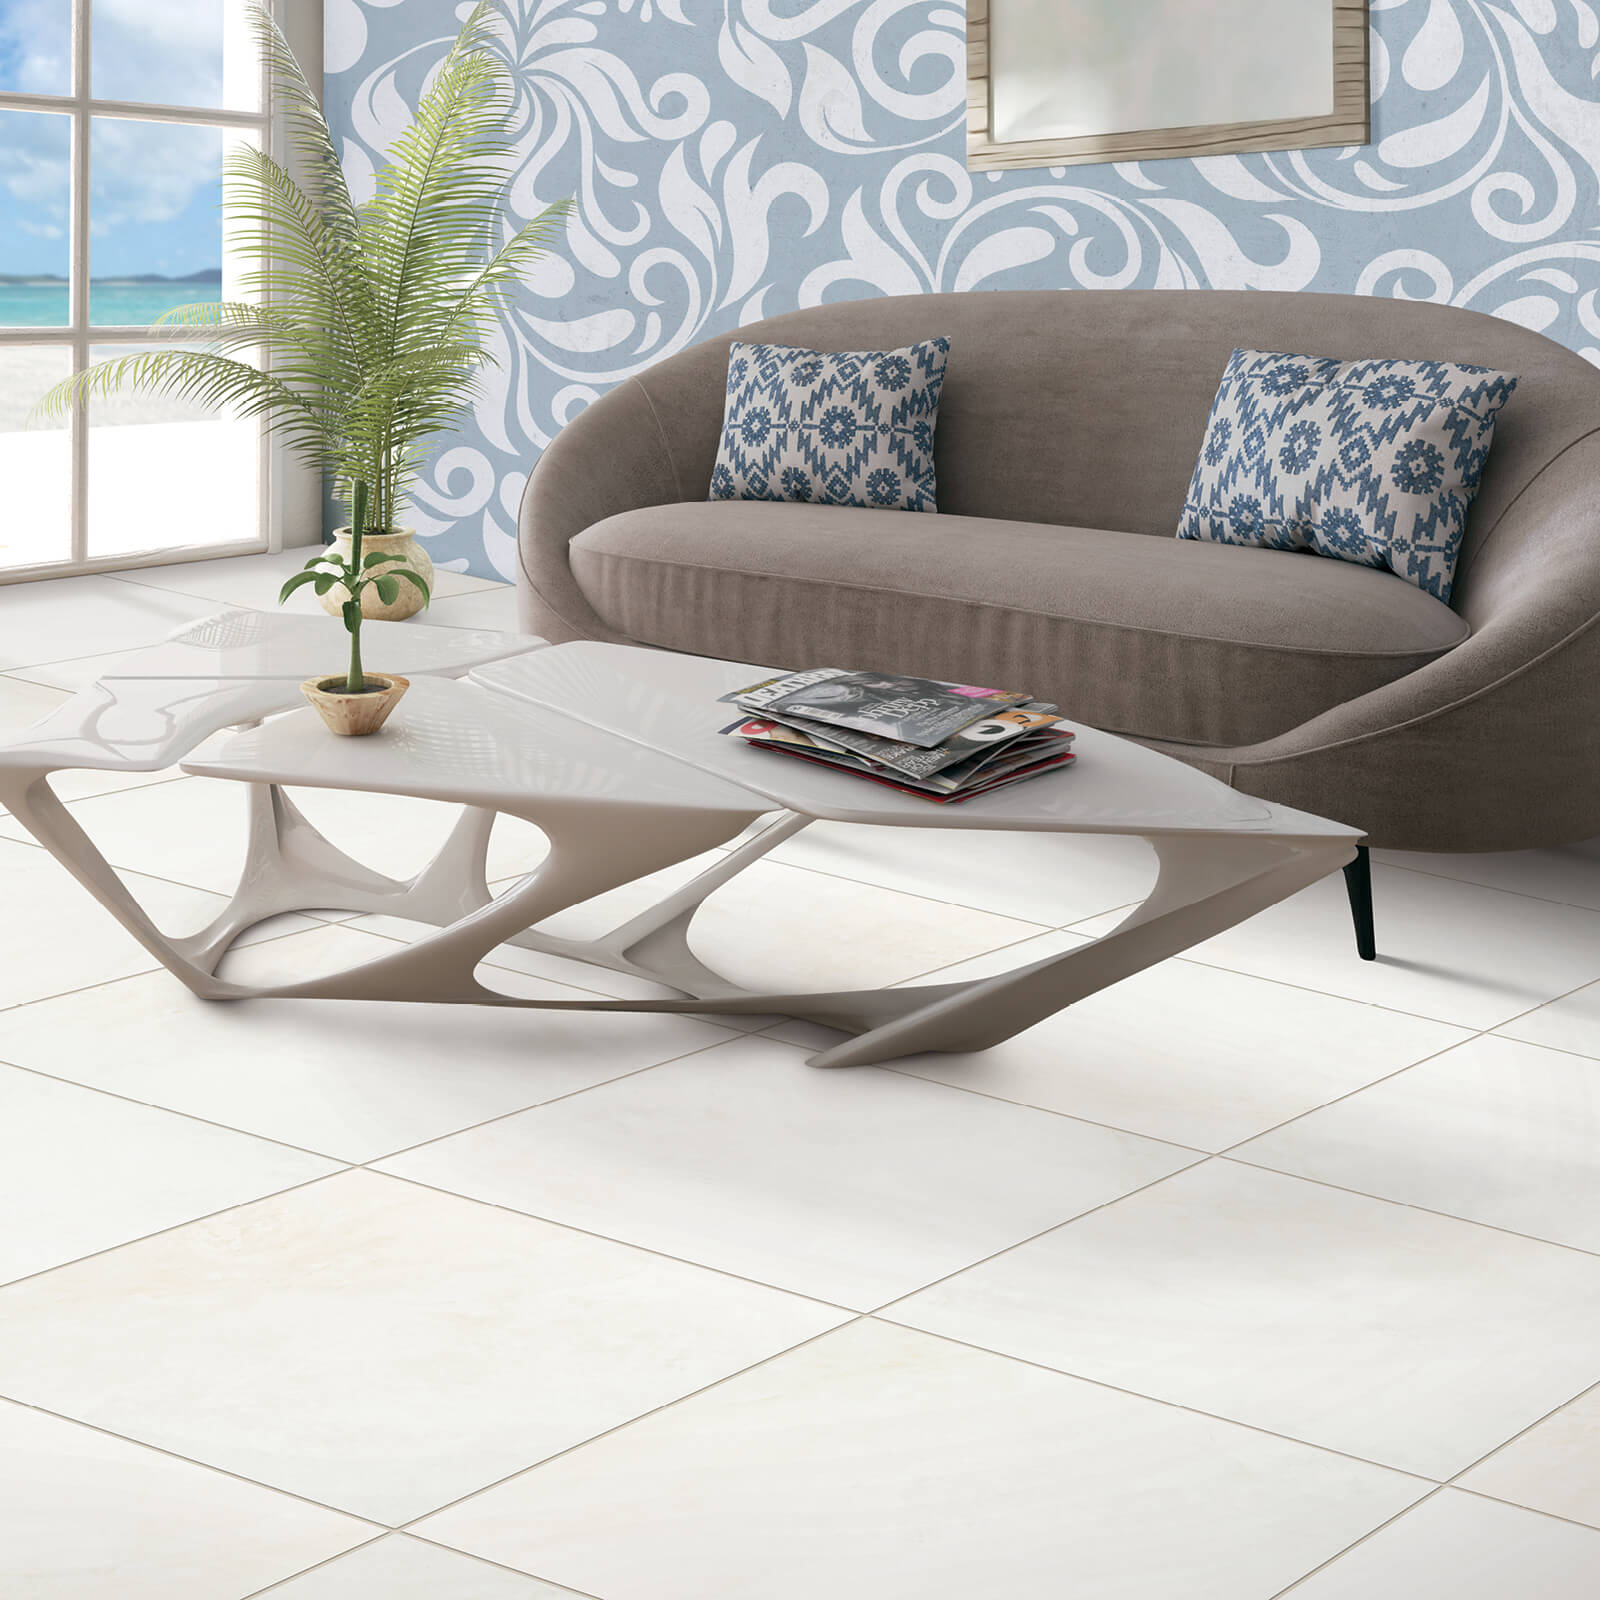 Tile flooring | Rugs Rolls and More